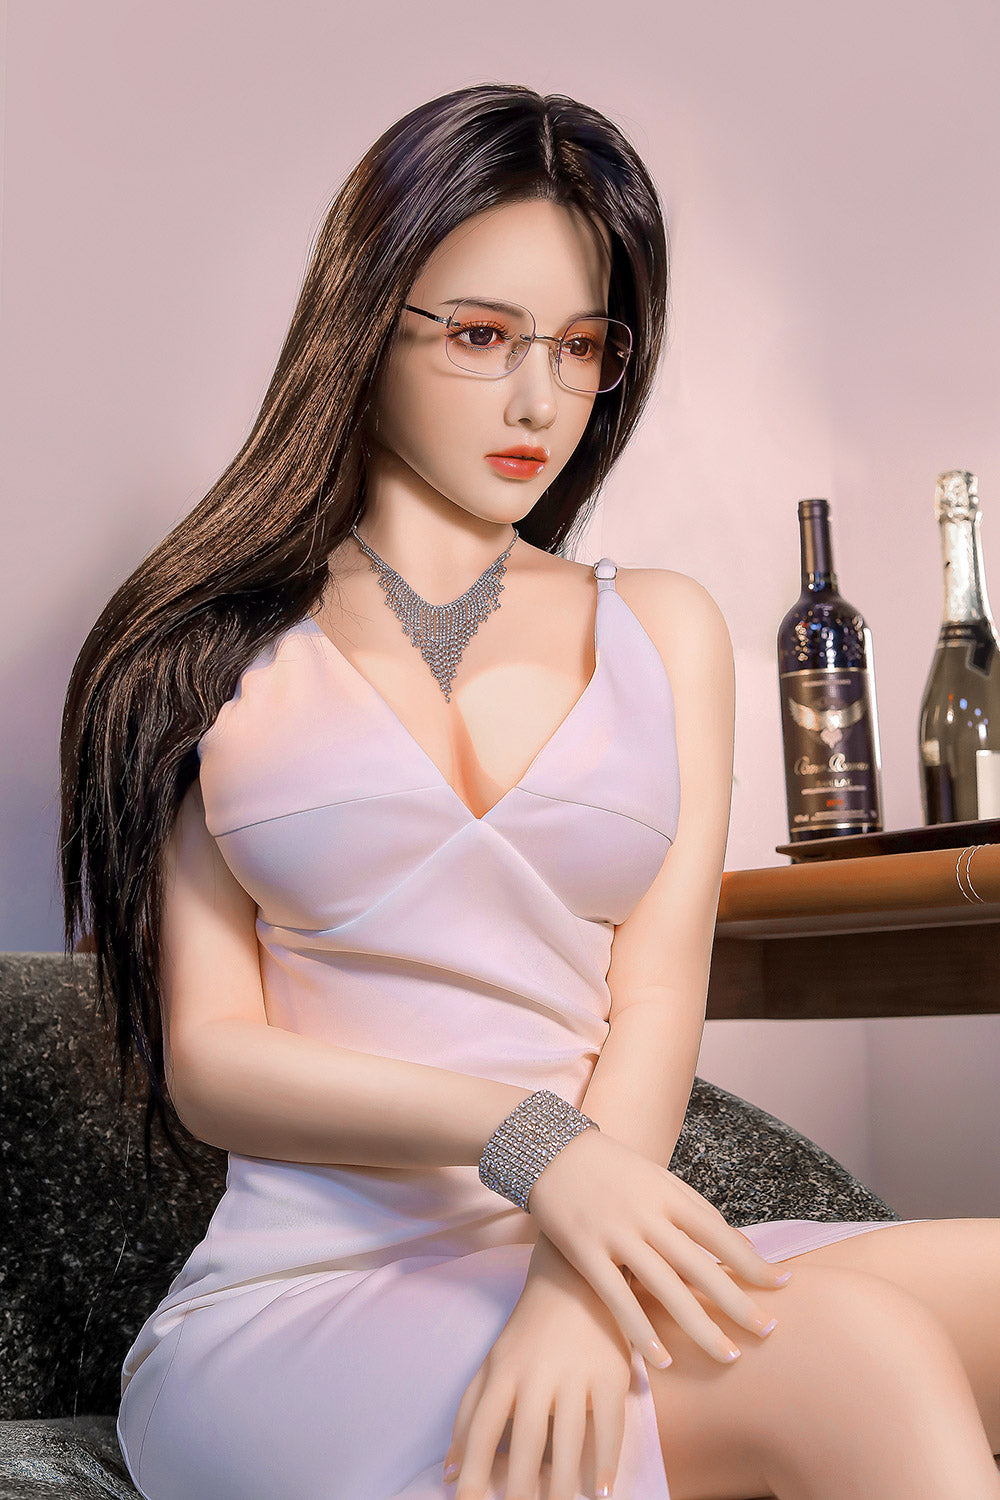 US Stock - RIDMII Lolanthe #266 Asian Silicone Head Pretty Adult Love Sex Doll - New Arrivals, US Stock - SexDollPartner